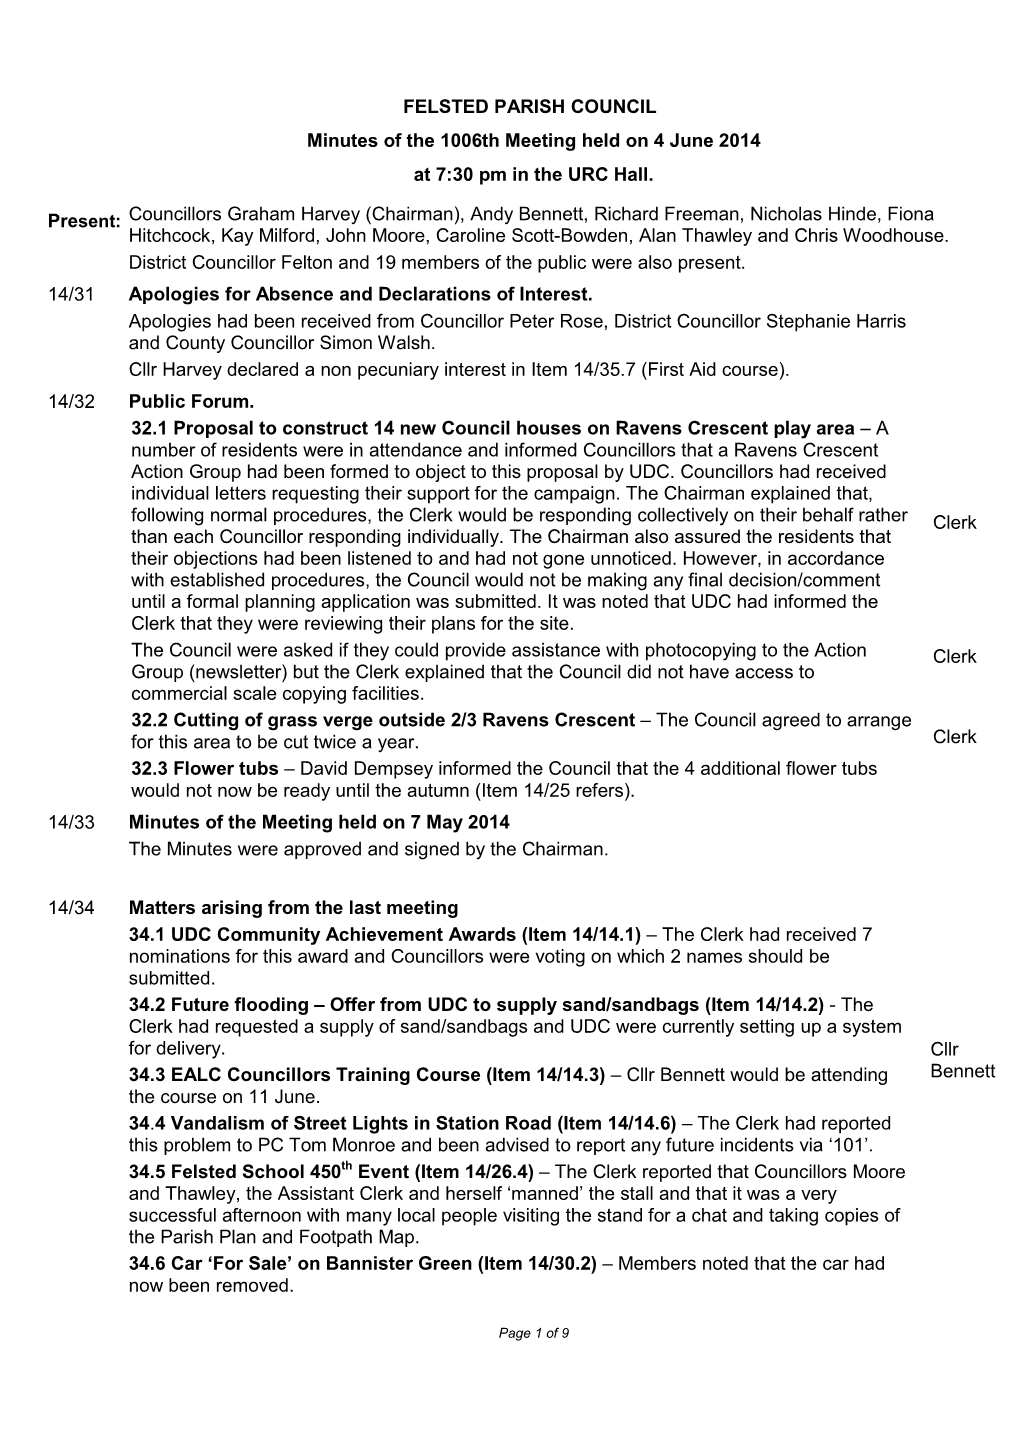 FELSTED PARISH COUNCIL Minutes of the 1006Th Meeting Held on 4 June 2014 at 7:30 Pm in the URC Hall